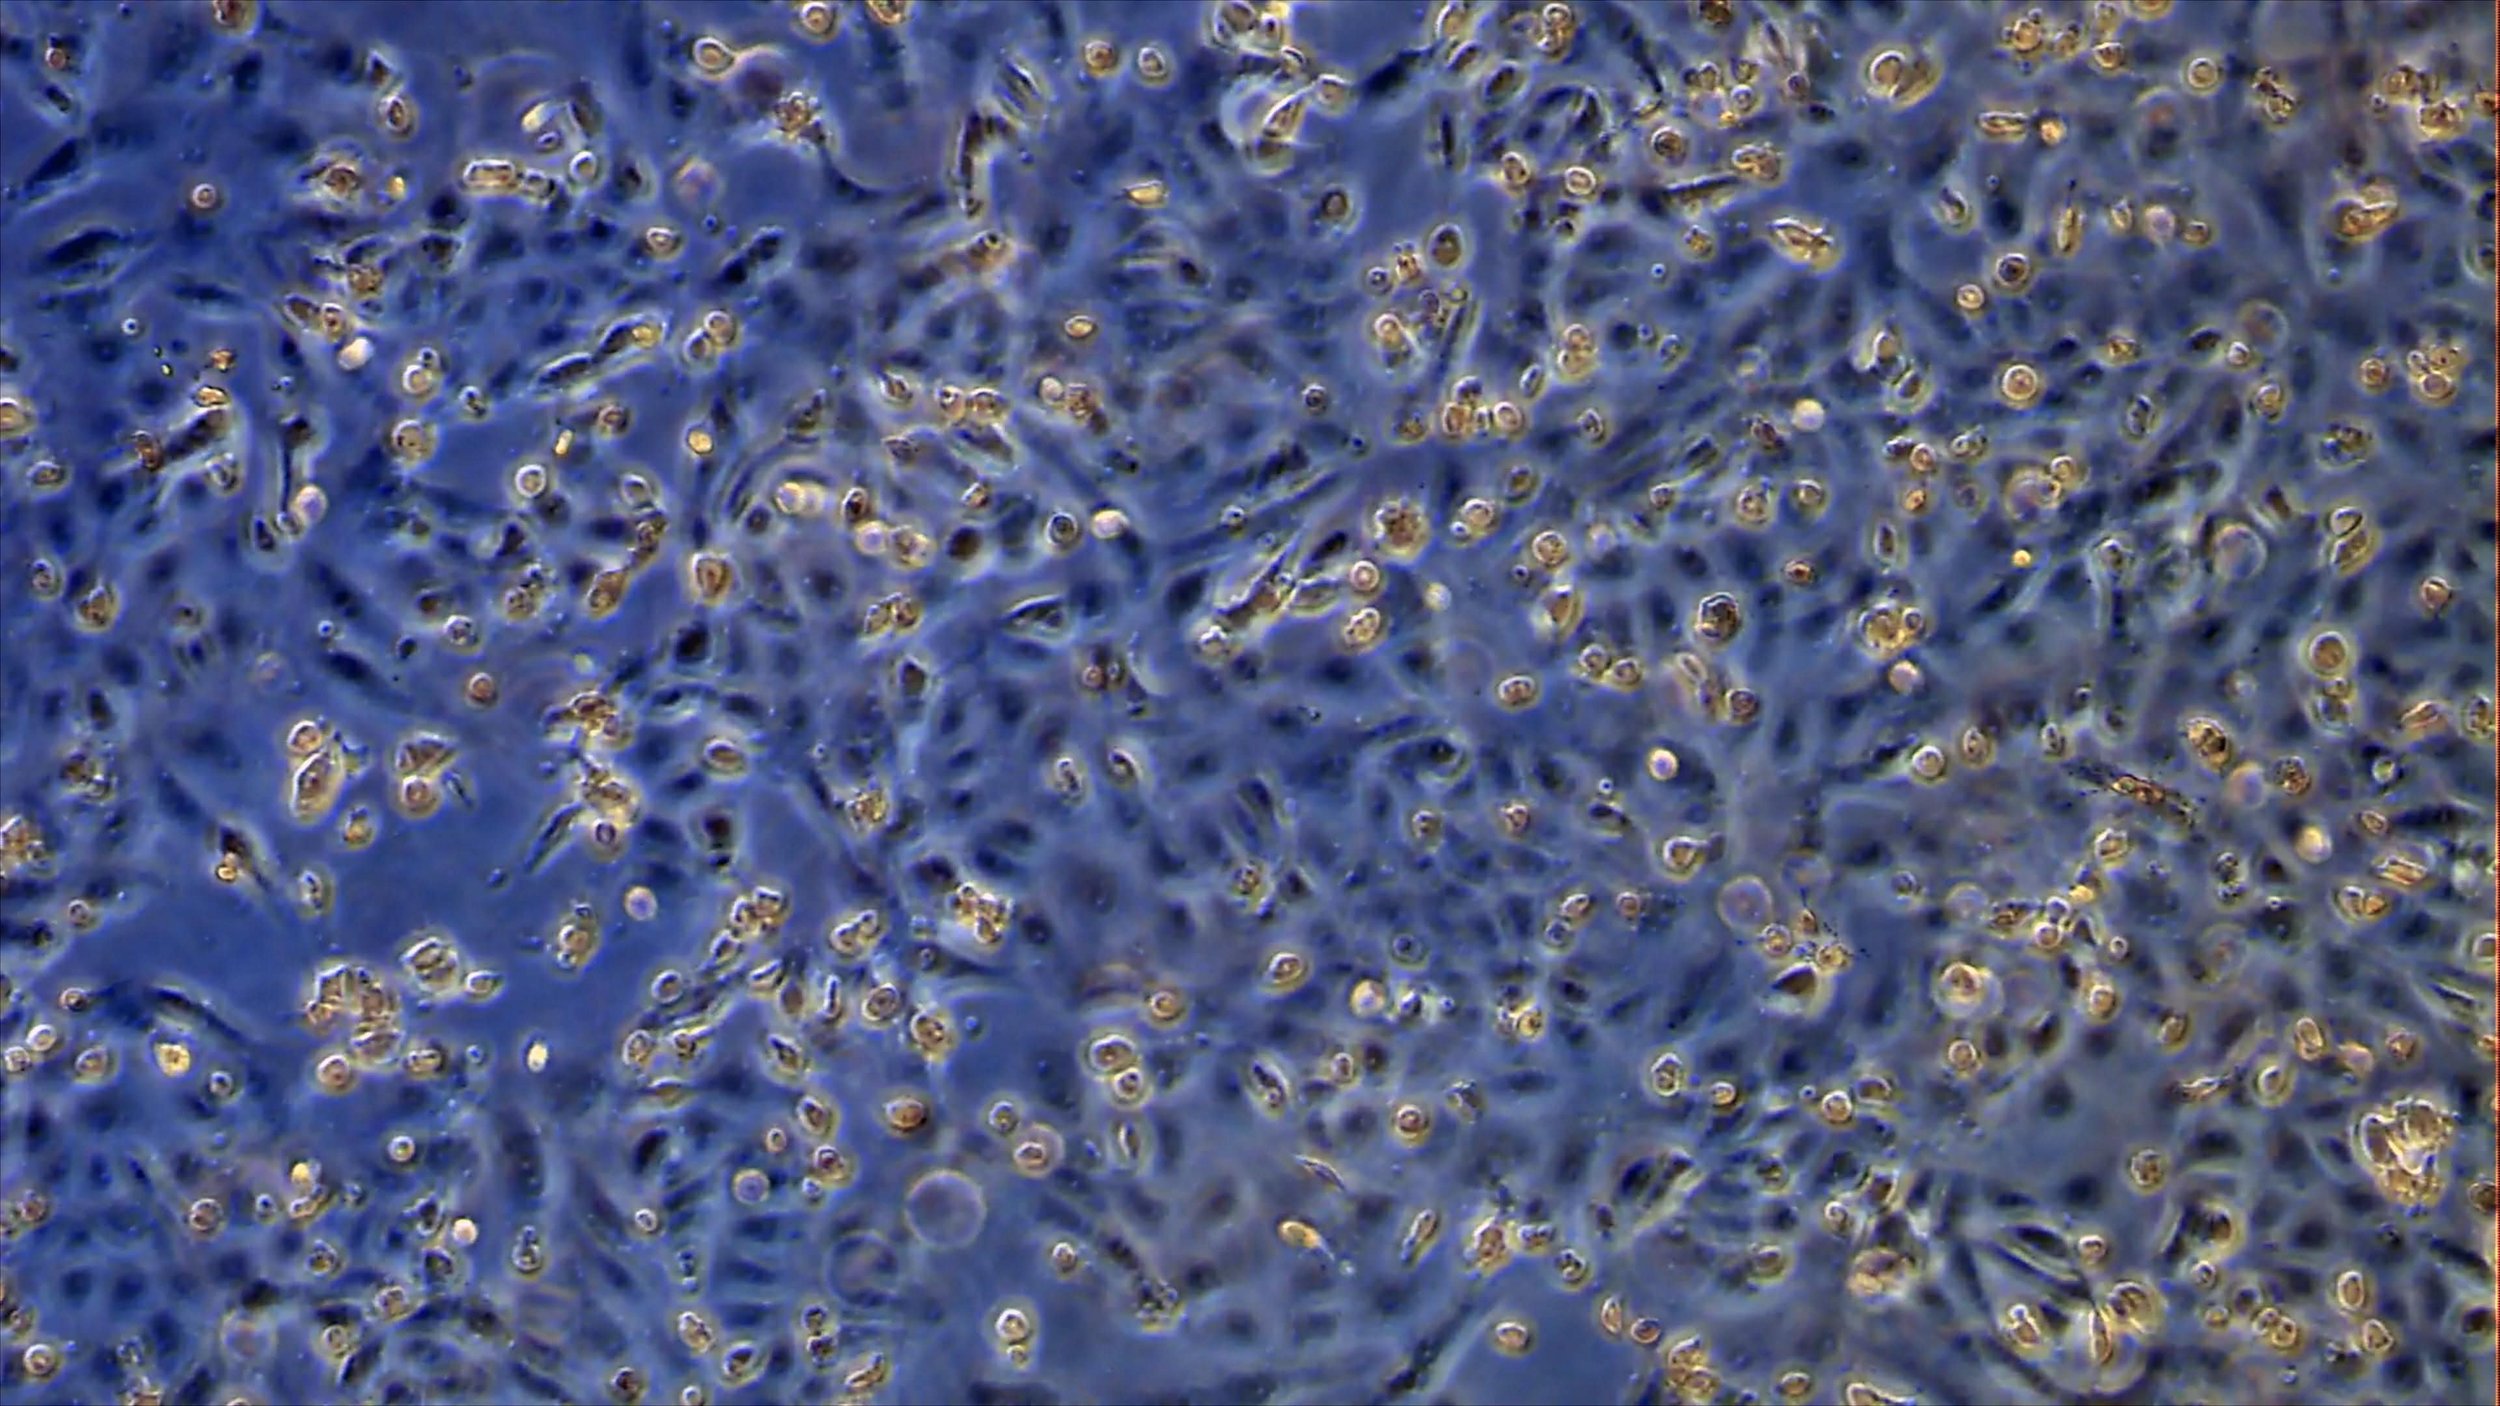 VHD_Promo STILL_25_Cells Infected with COVID19-min.jpg